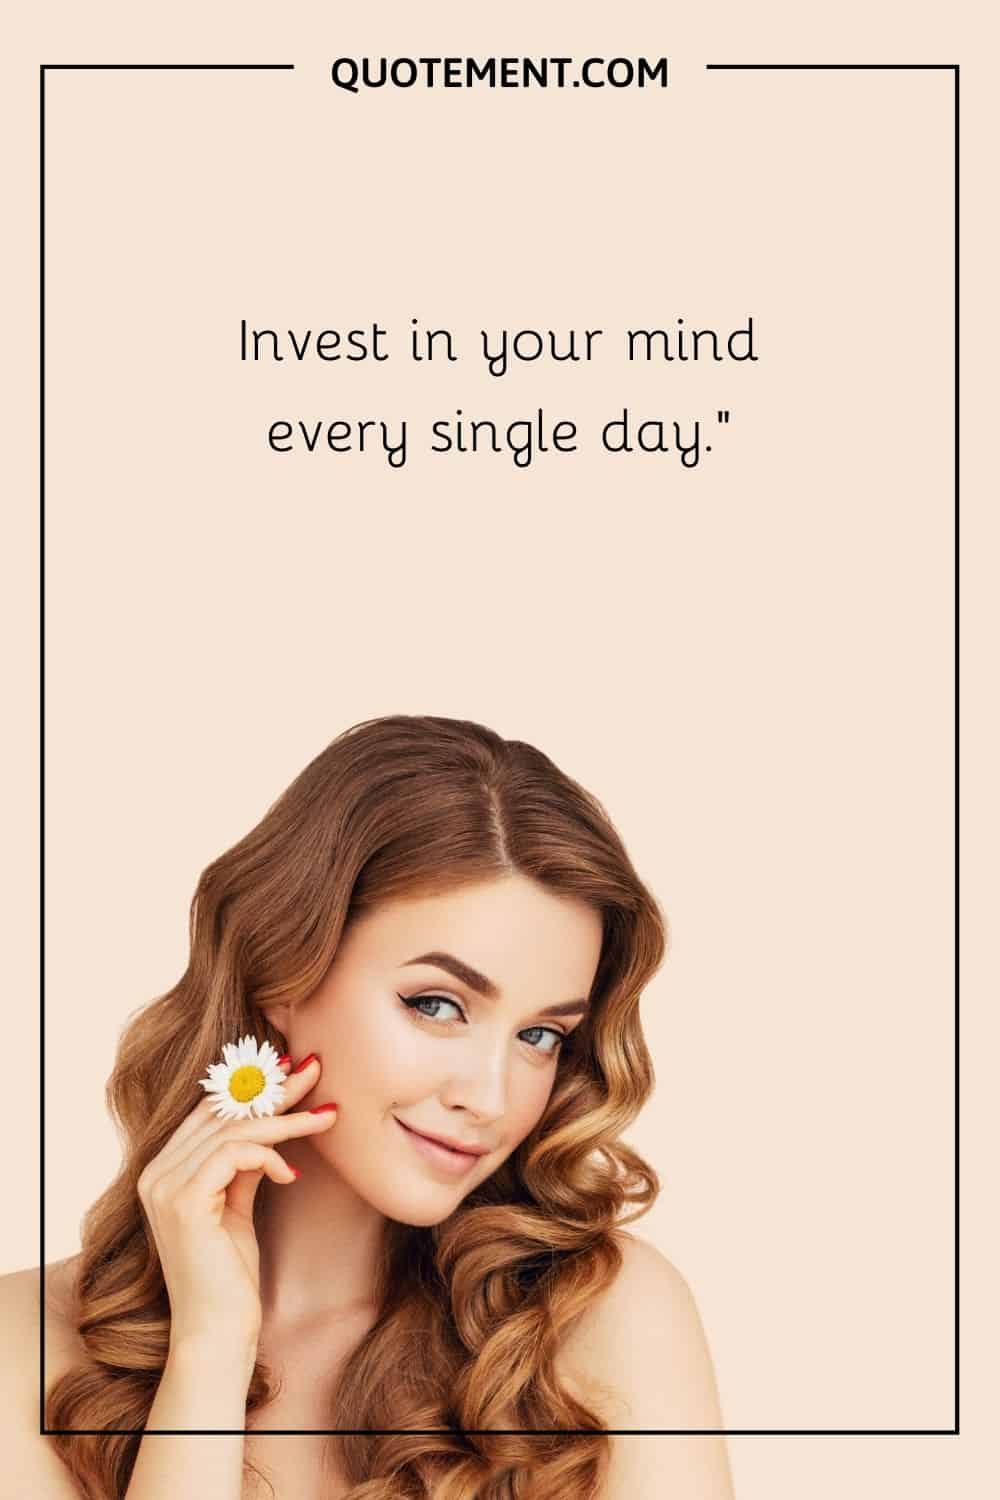 Invest in your mind every single day.